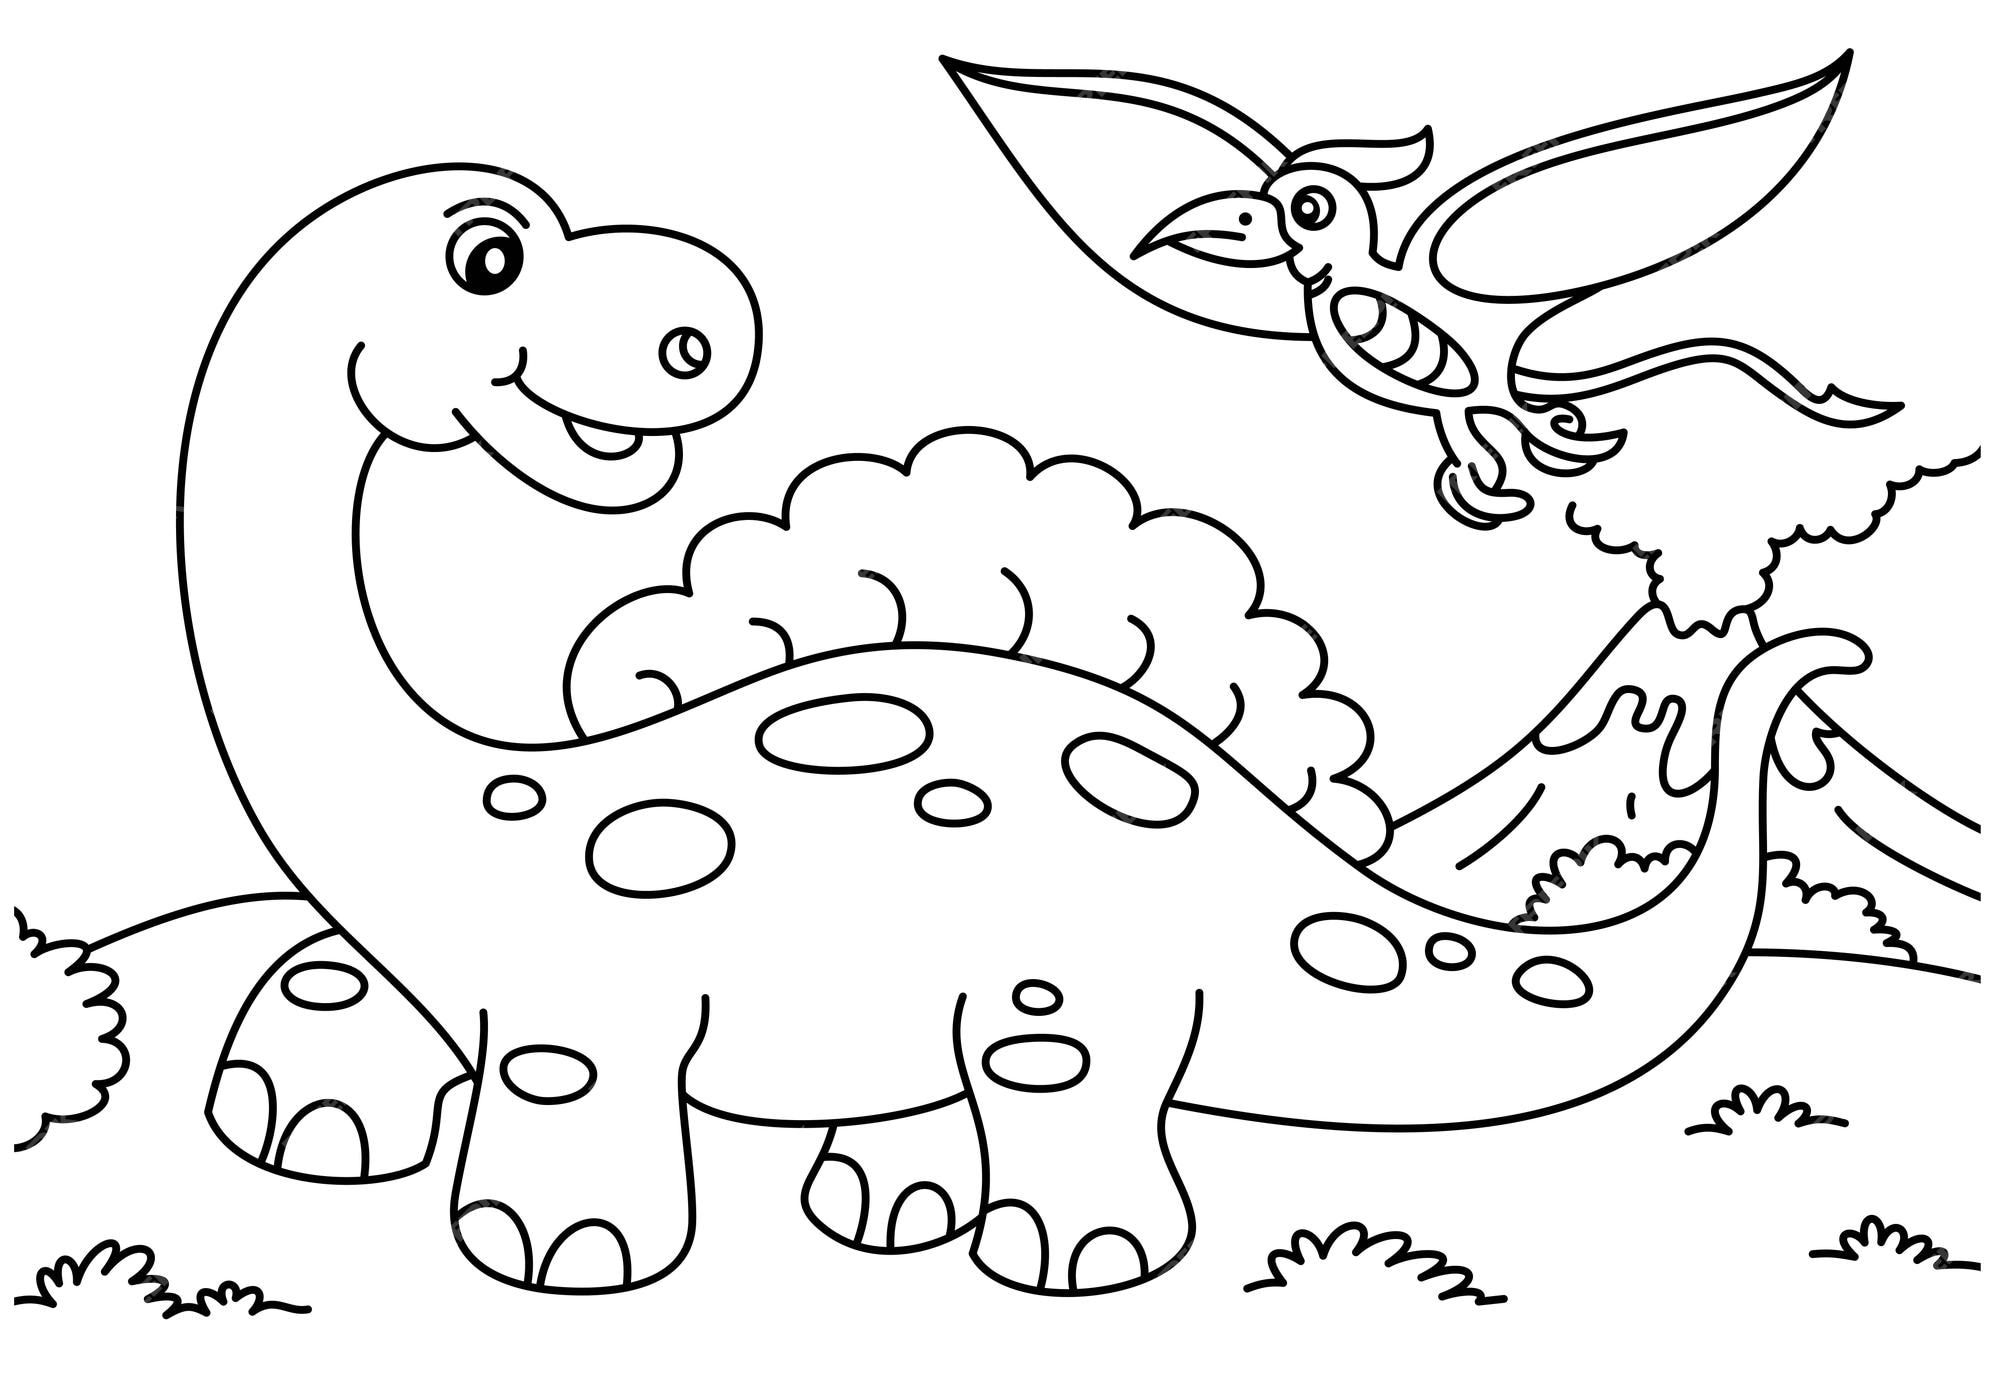 Premium vector dinosaur coloring page or book for kids vector